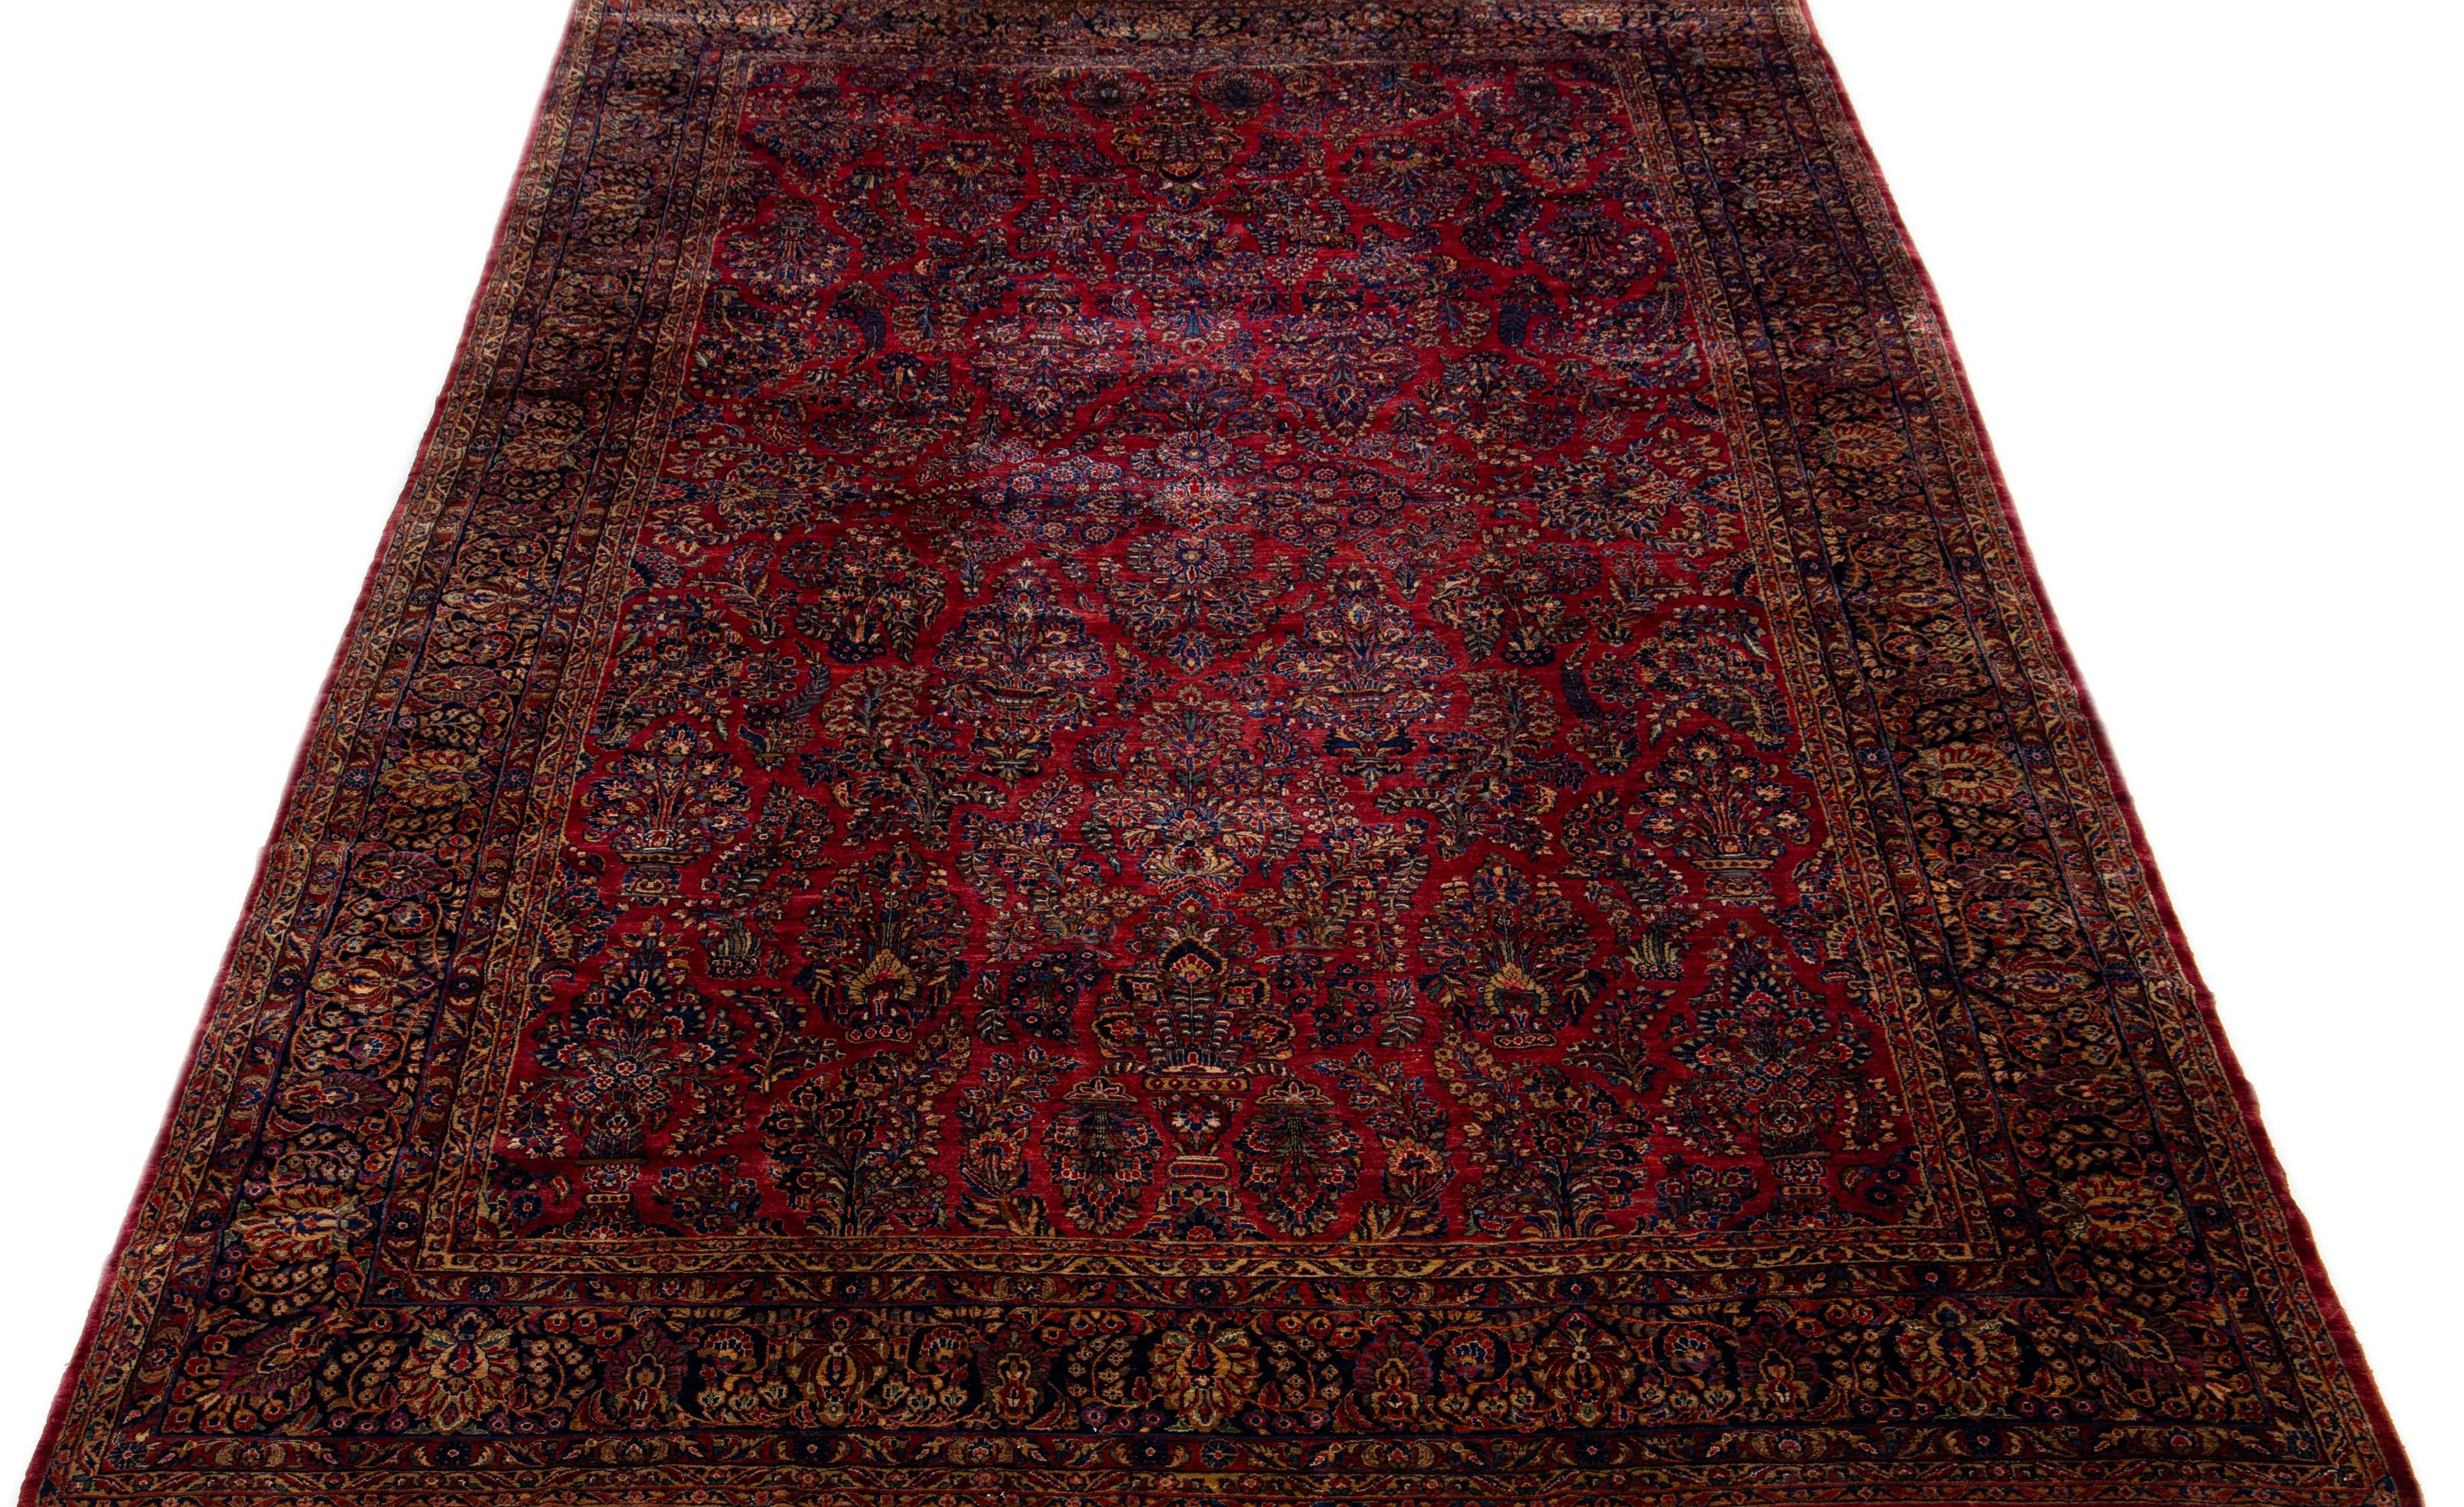 This luxurious antique Persian Sarouk rug is meticulously crafted by hand using fine wool. Its striking red field is elegantly framed by a complex dark blue border adorned with an intricate floral pattern that displays a stunning range of